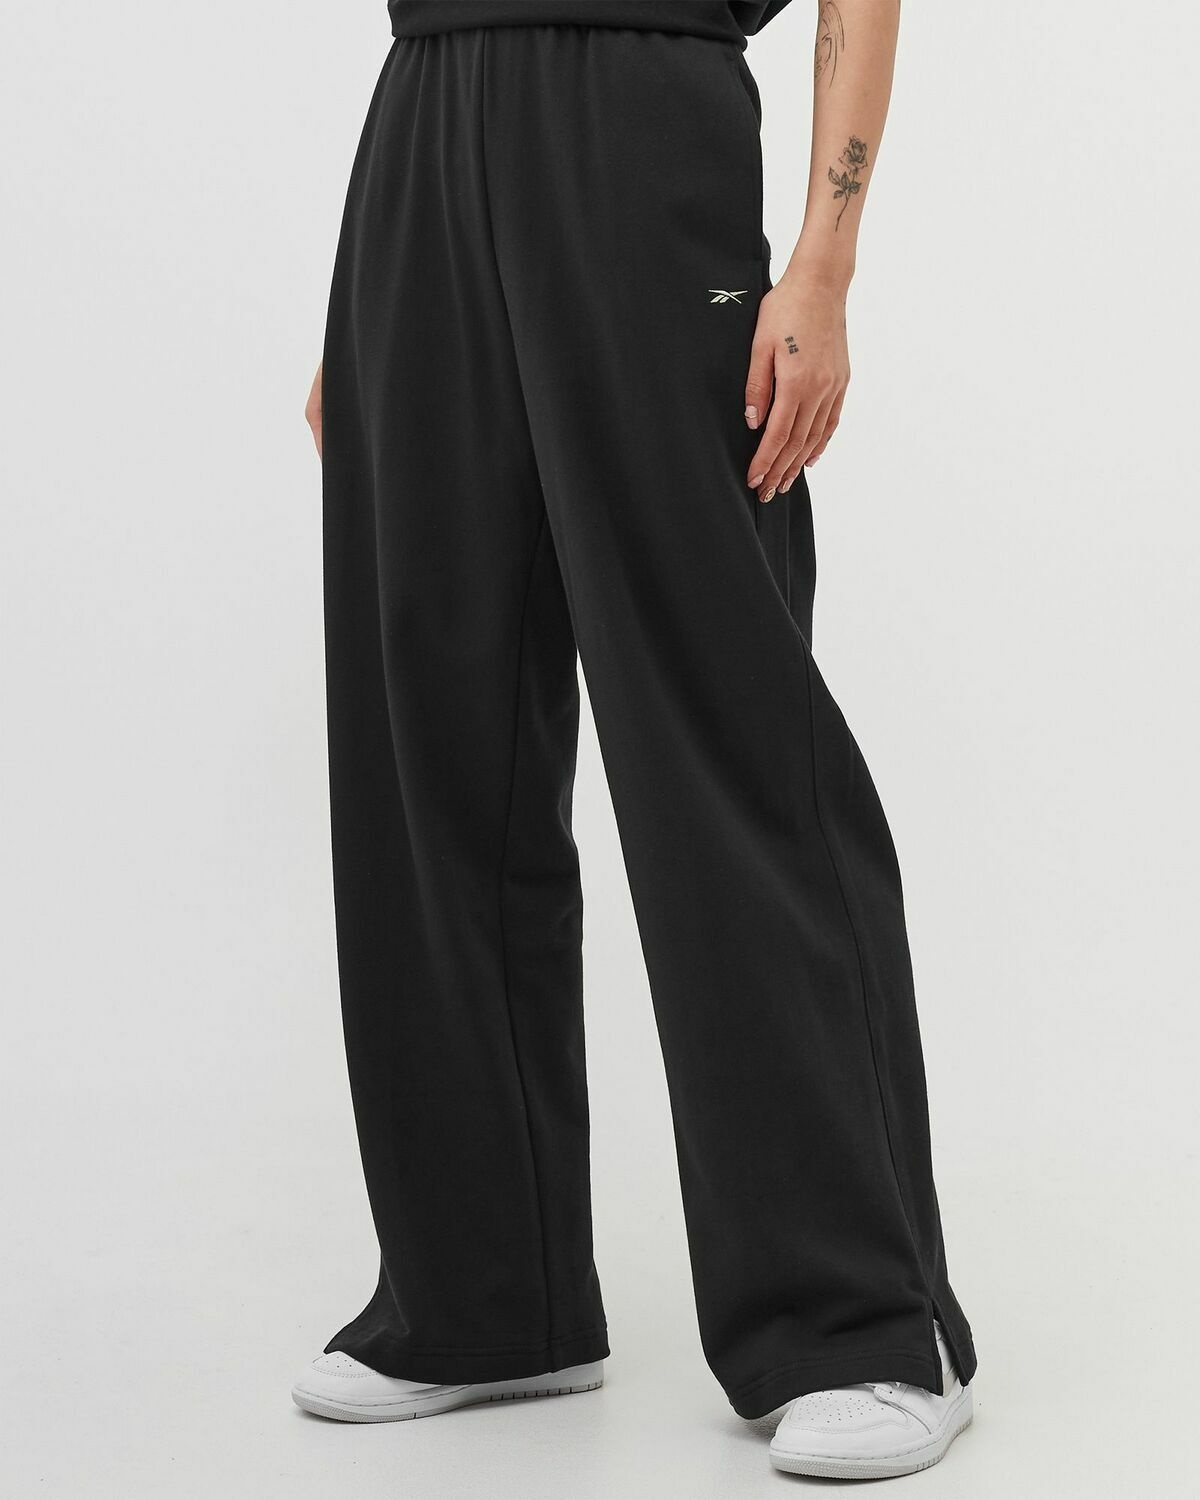 Reebok Classics French Terry Pants in BLACK